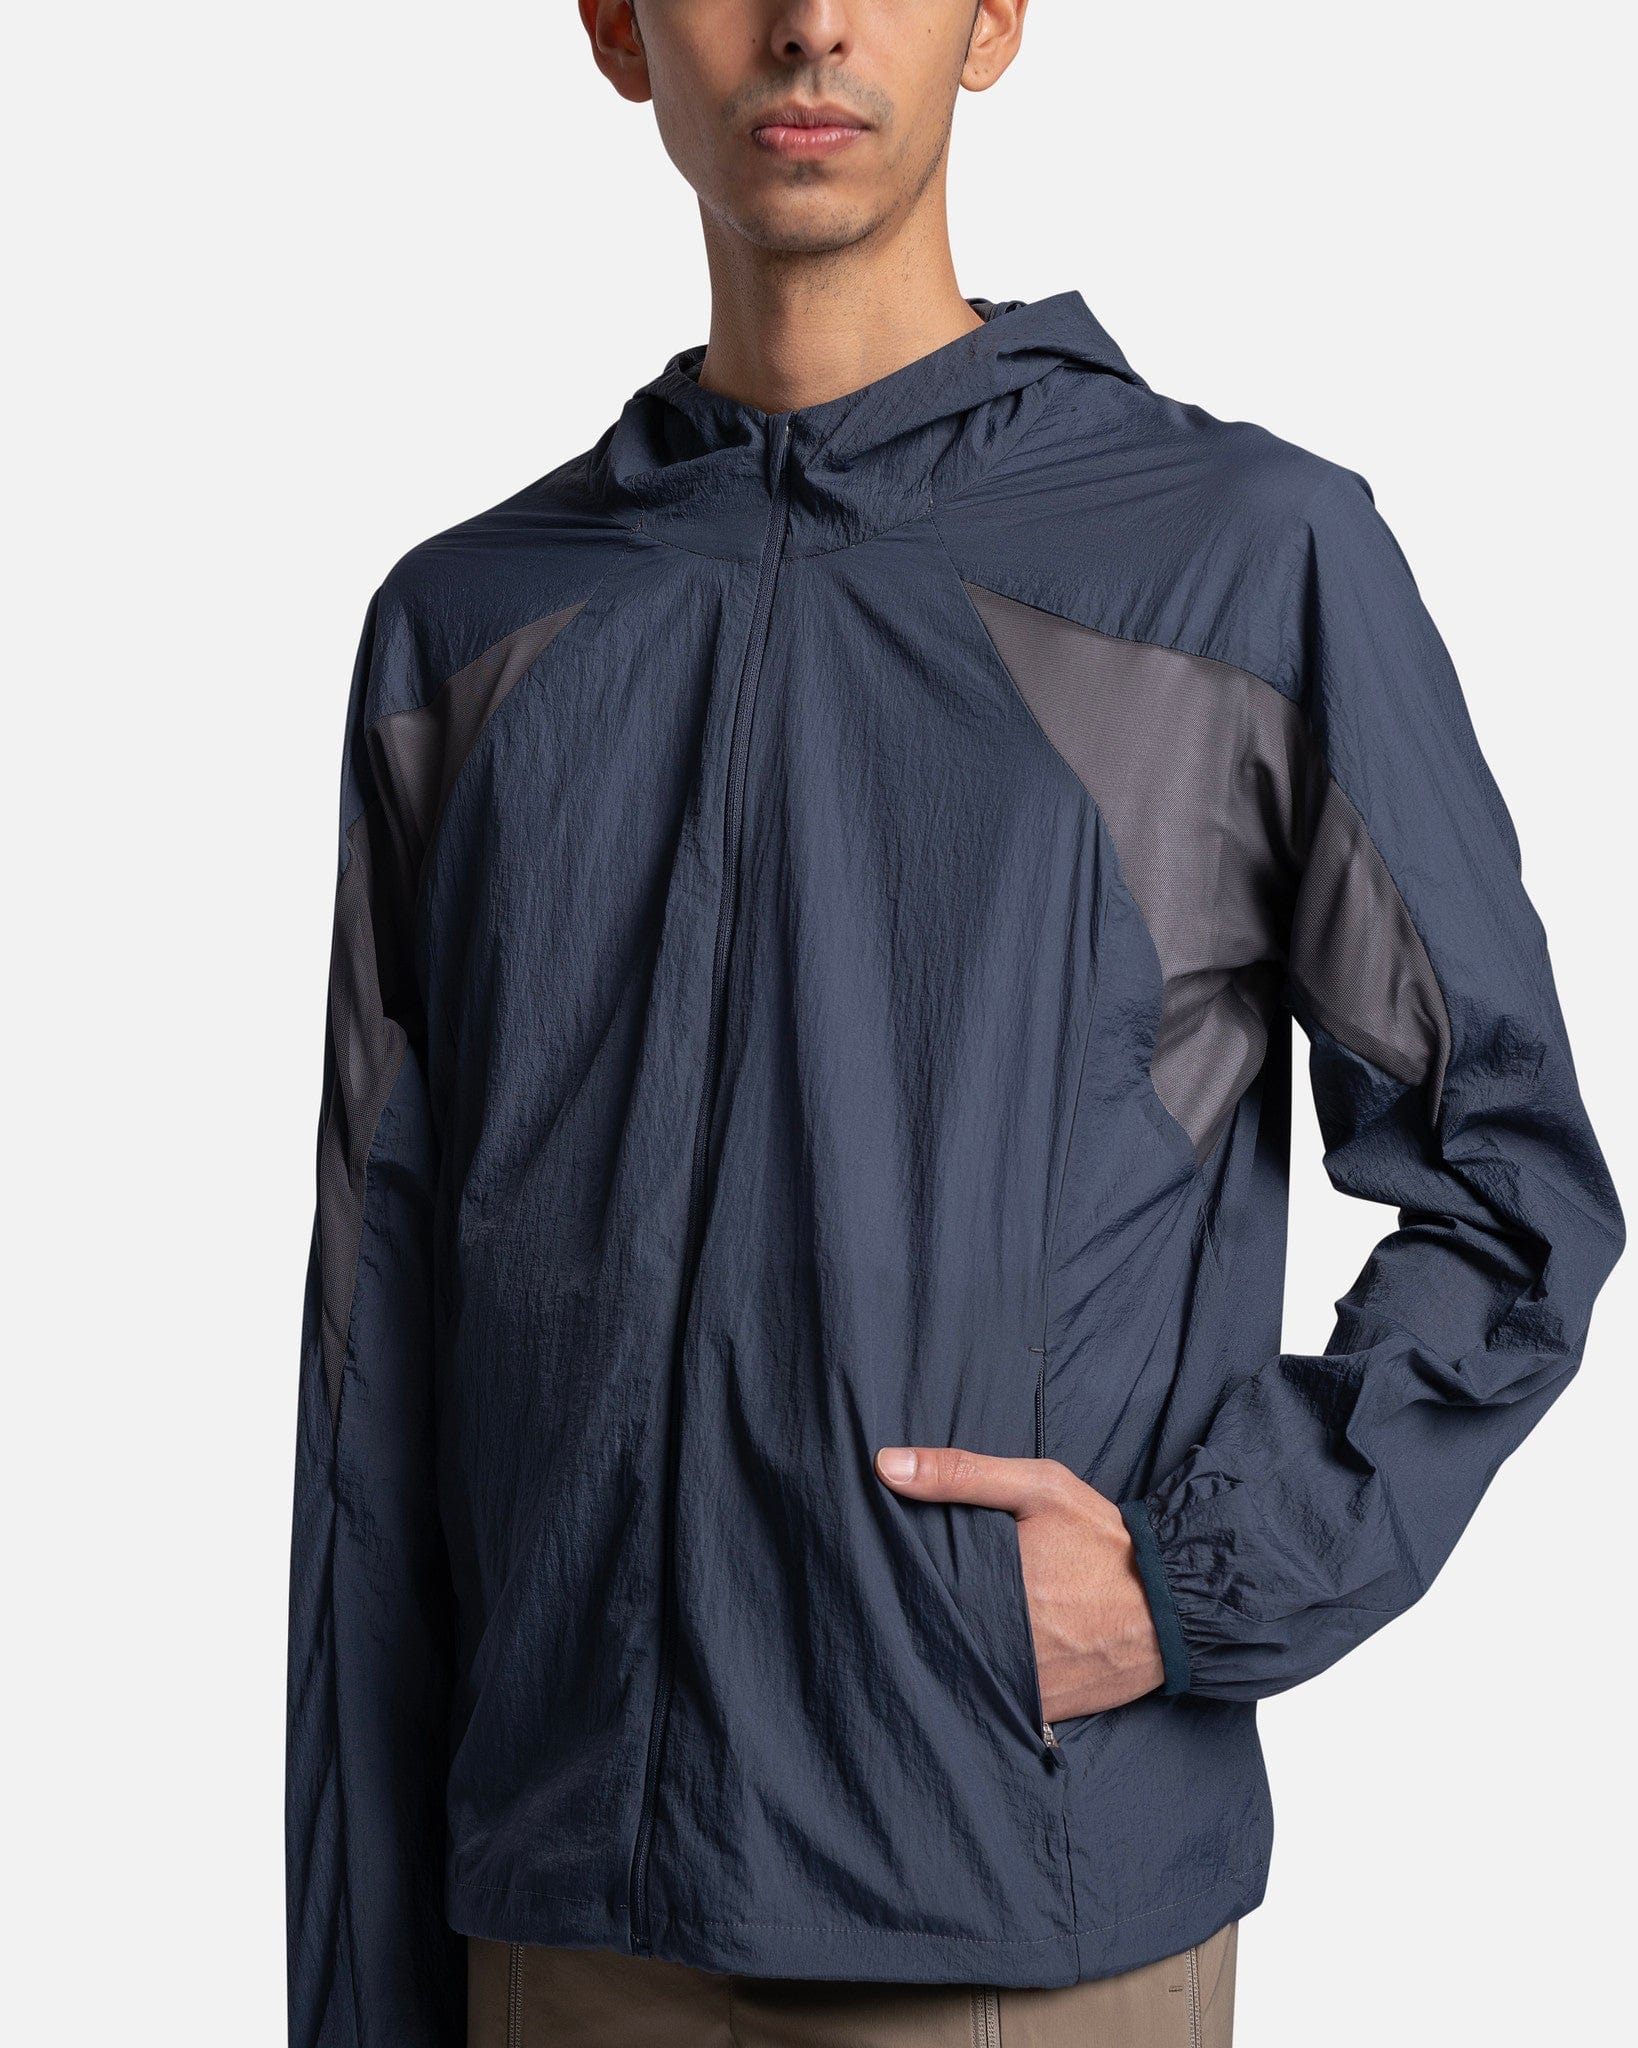 POST ARCHIVE FACTION (P.A.F) Men's Jackets 5.0+ Technical Jacket Right in Nylon/Navy